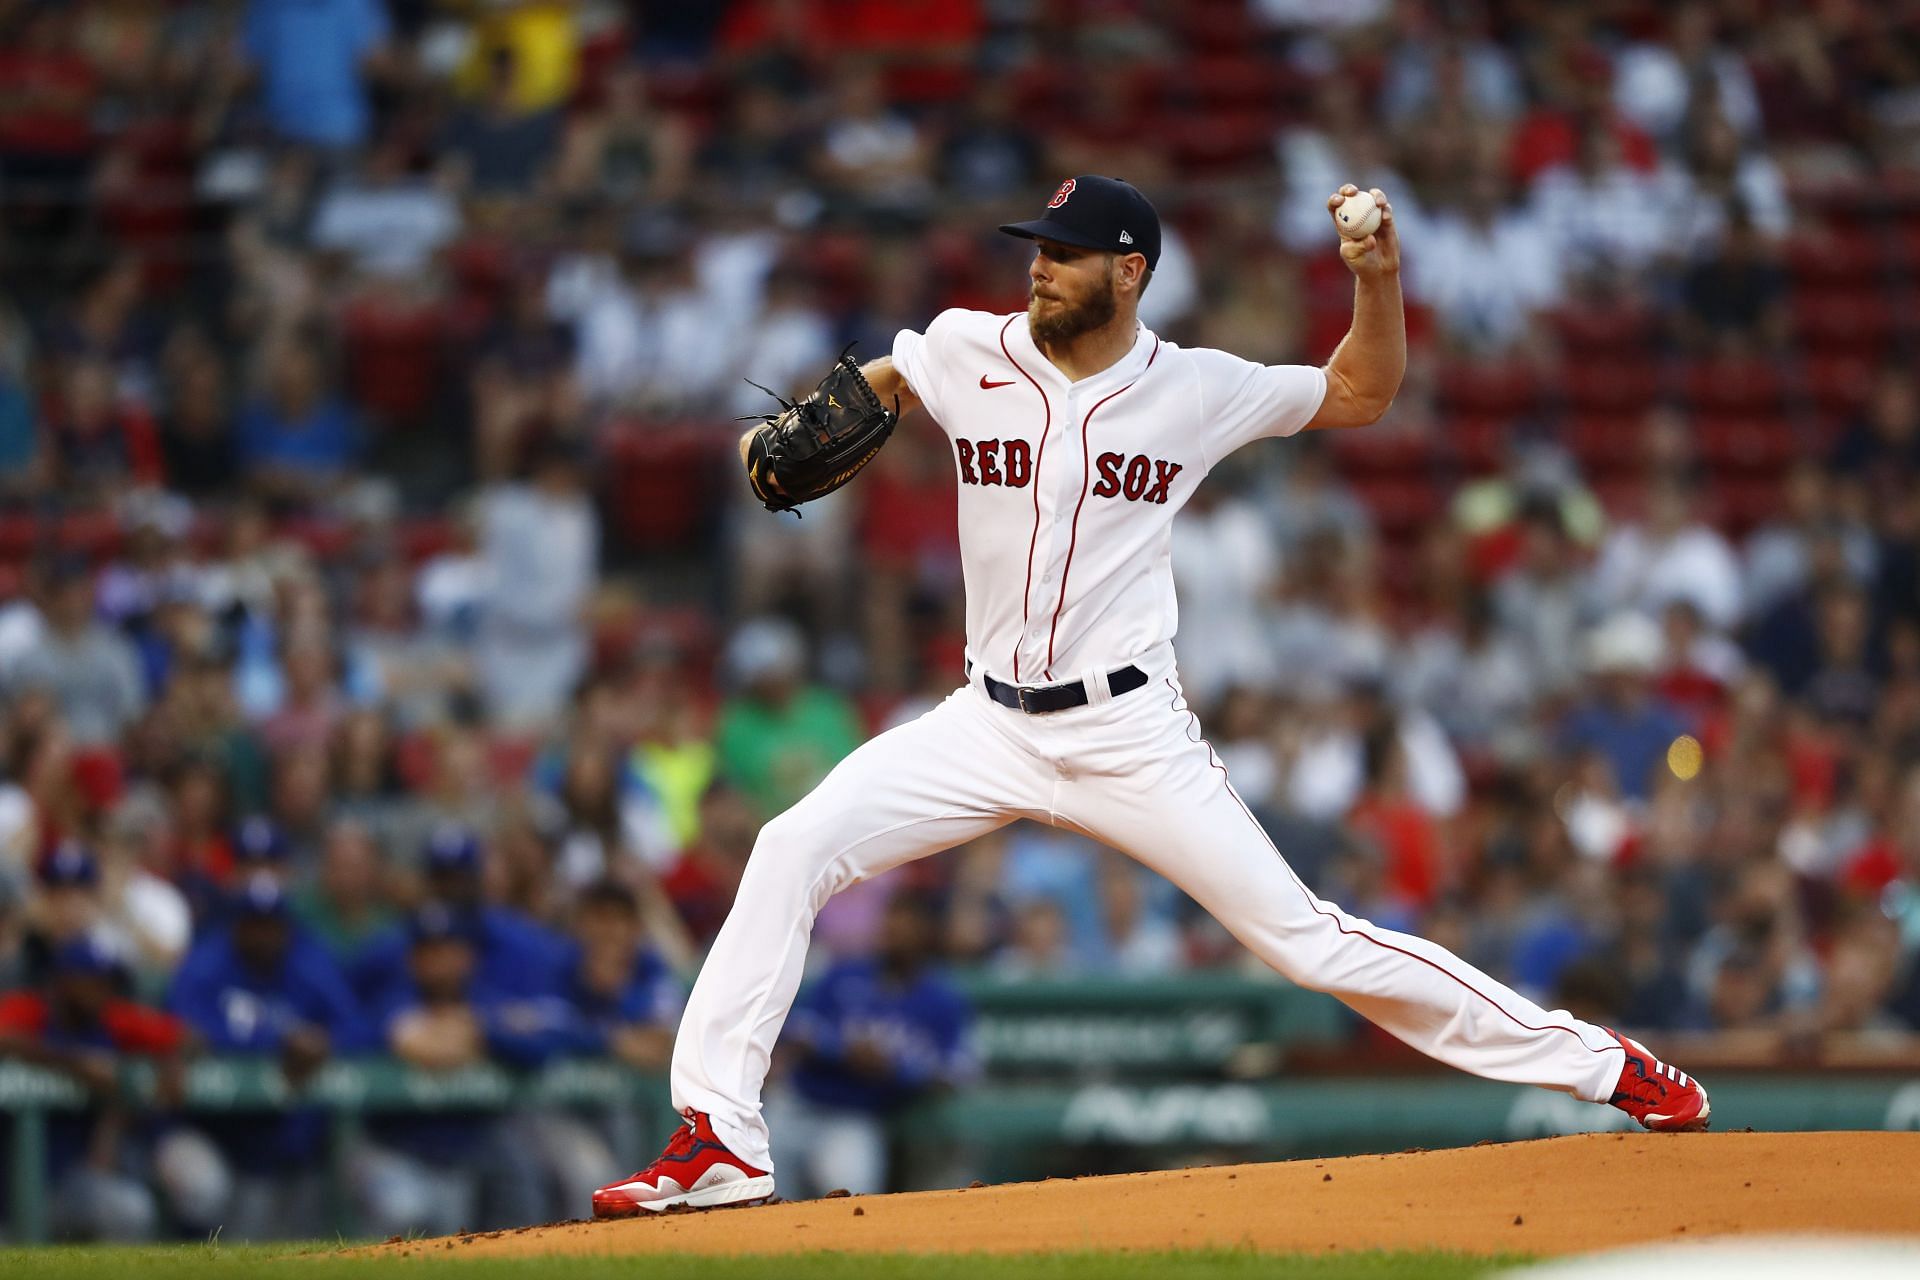 Readers share their predictions for the 2023 Red Sox season - The